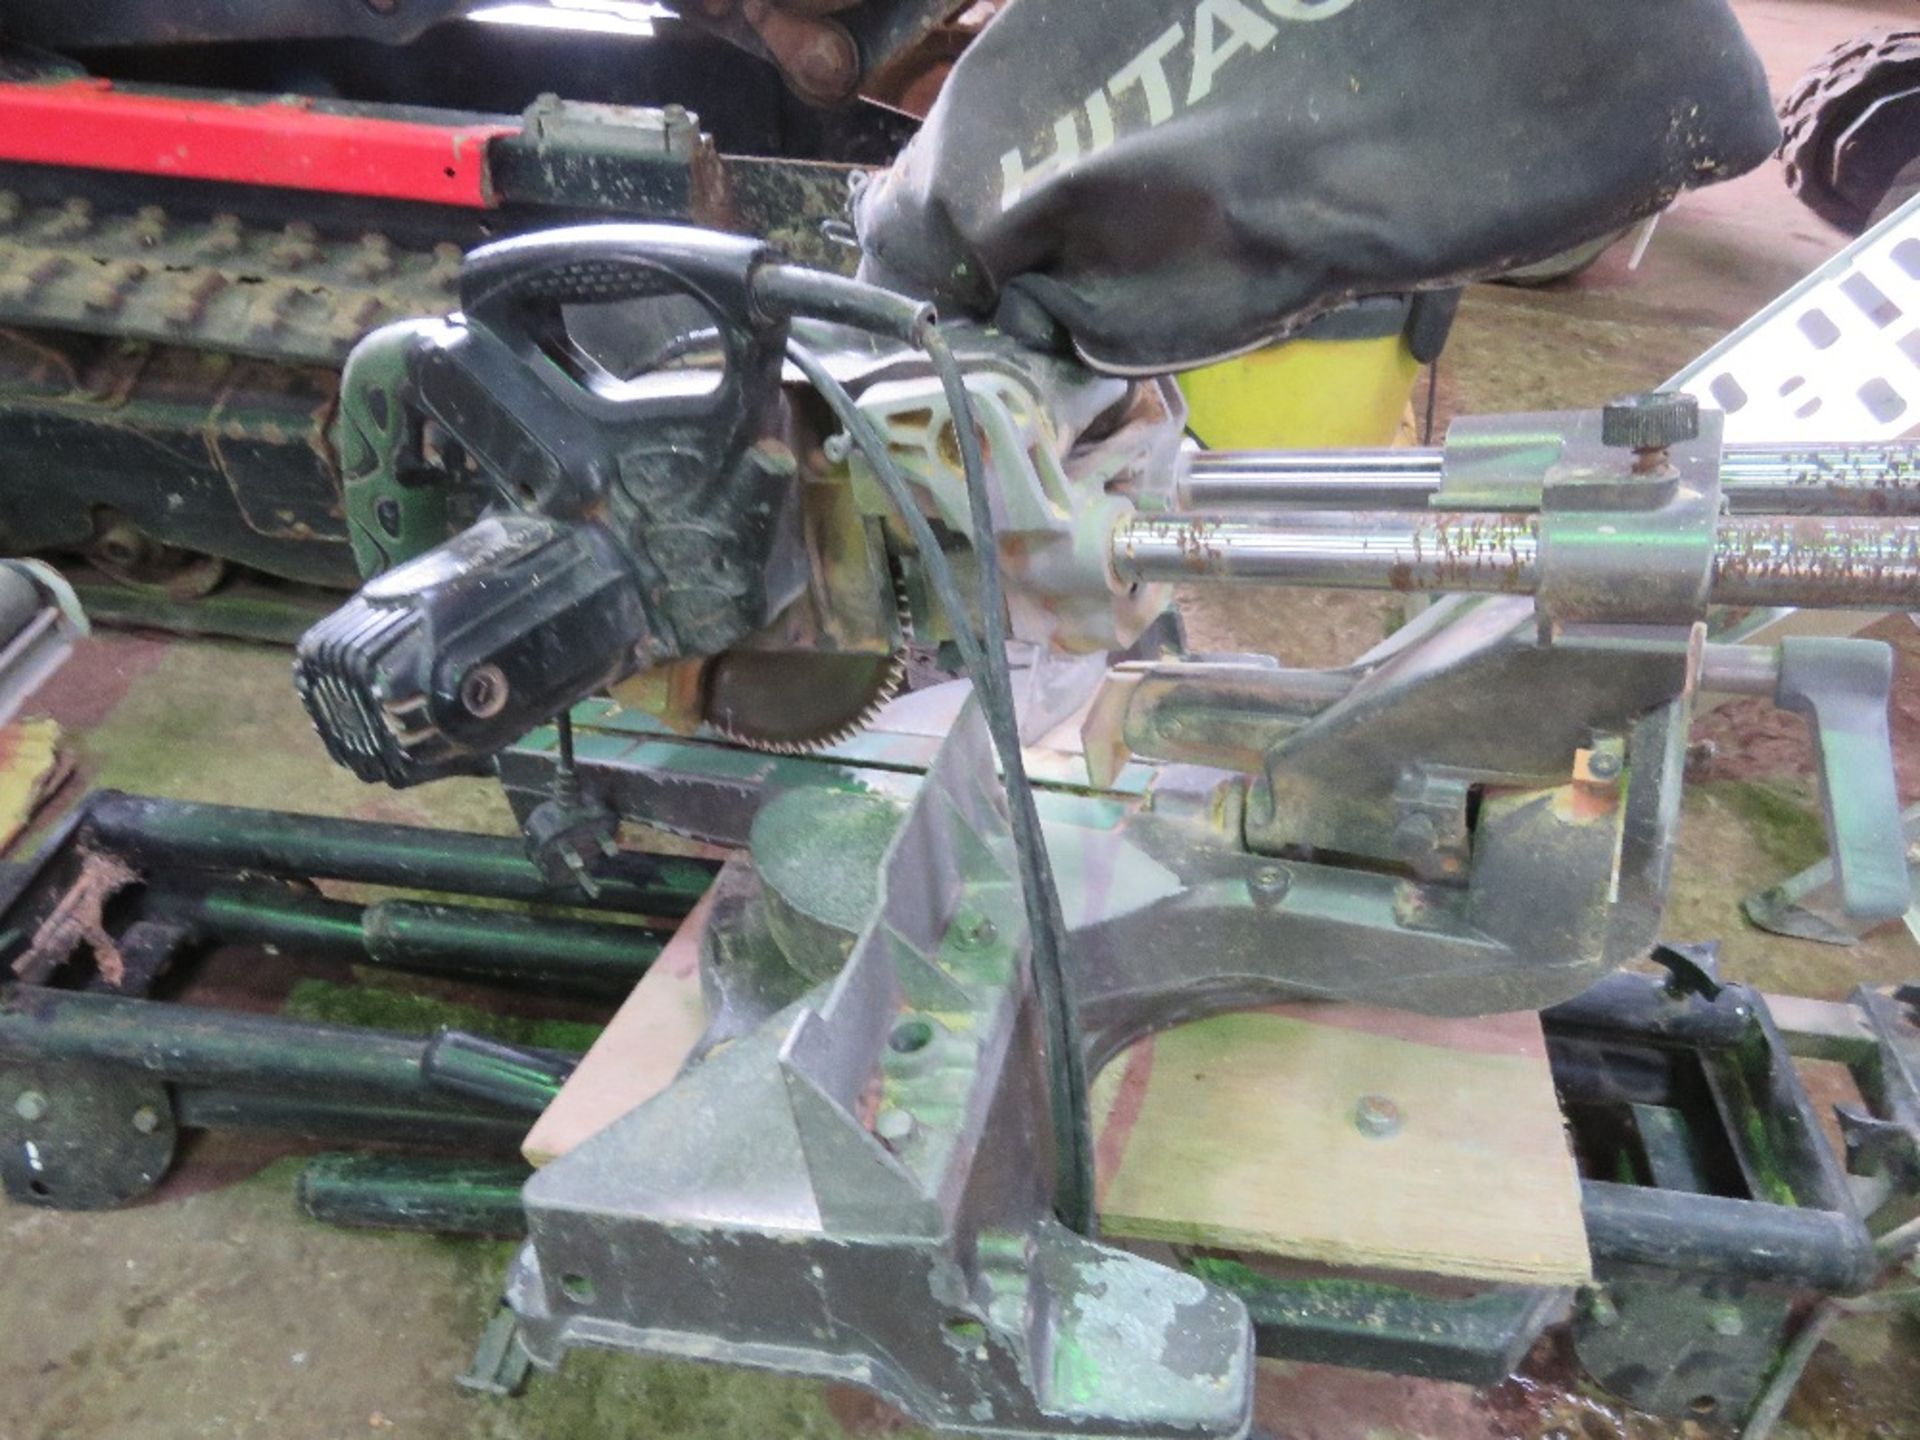 HITACHI 240VOLT POWERED CROSS CUT MITRE SAW PLUS STAND. OWNER RETIRING AND EMMIGRATING. THIS LOT I - Image 9 of 9